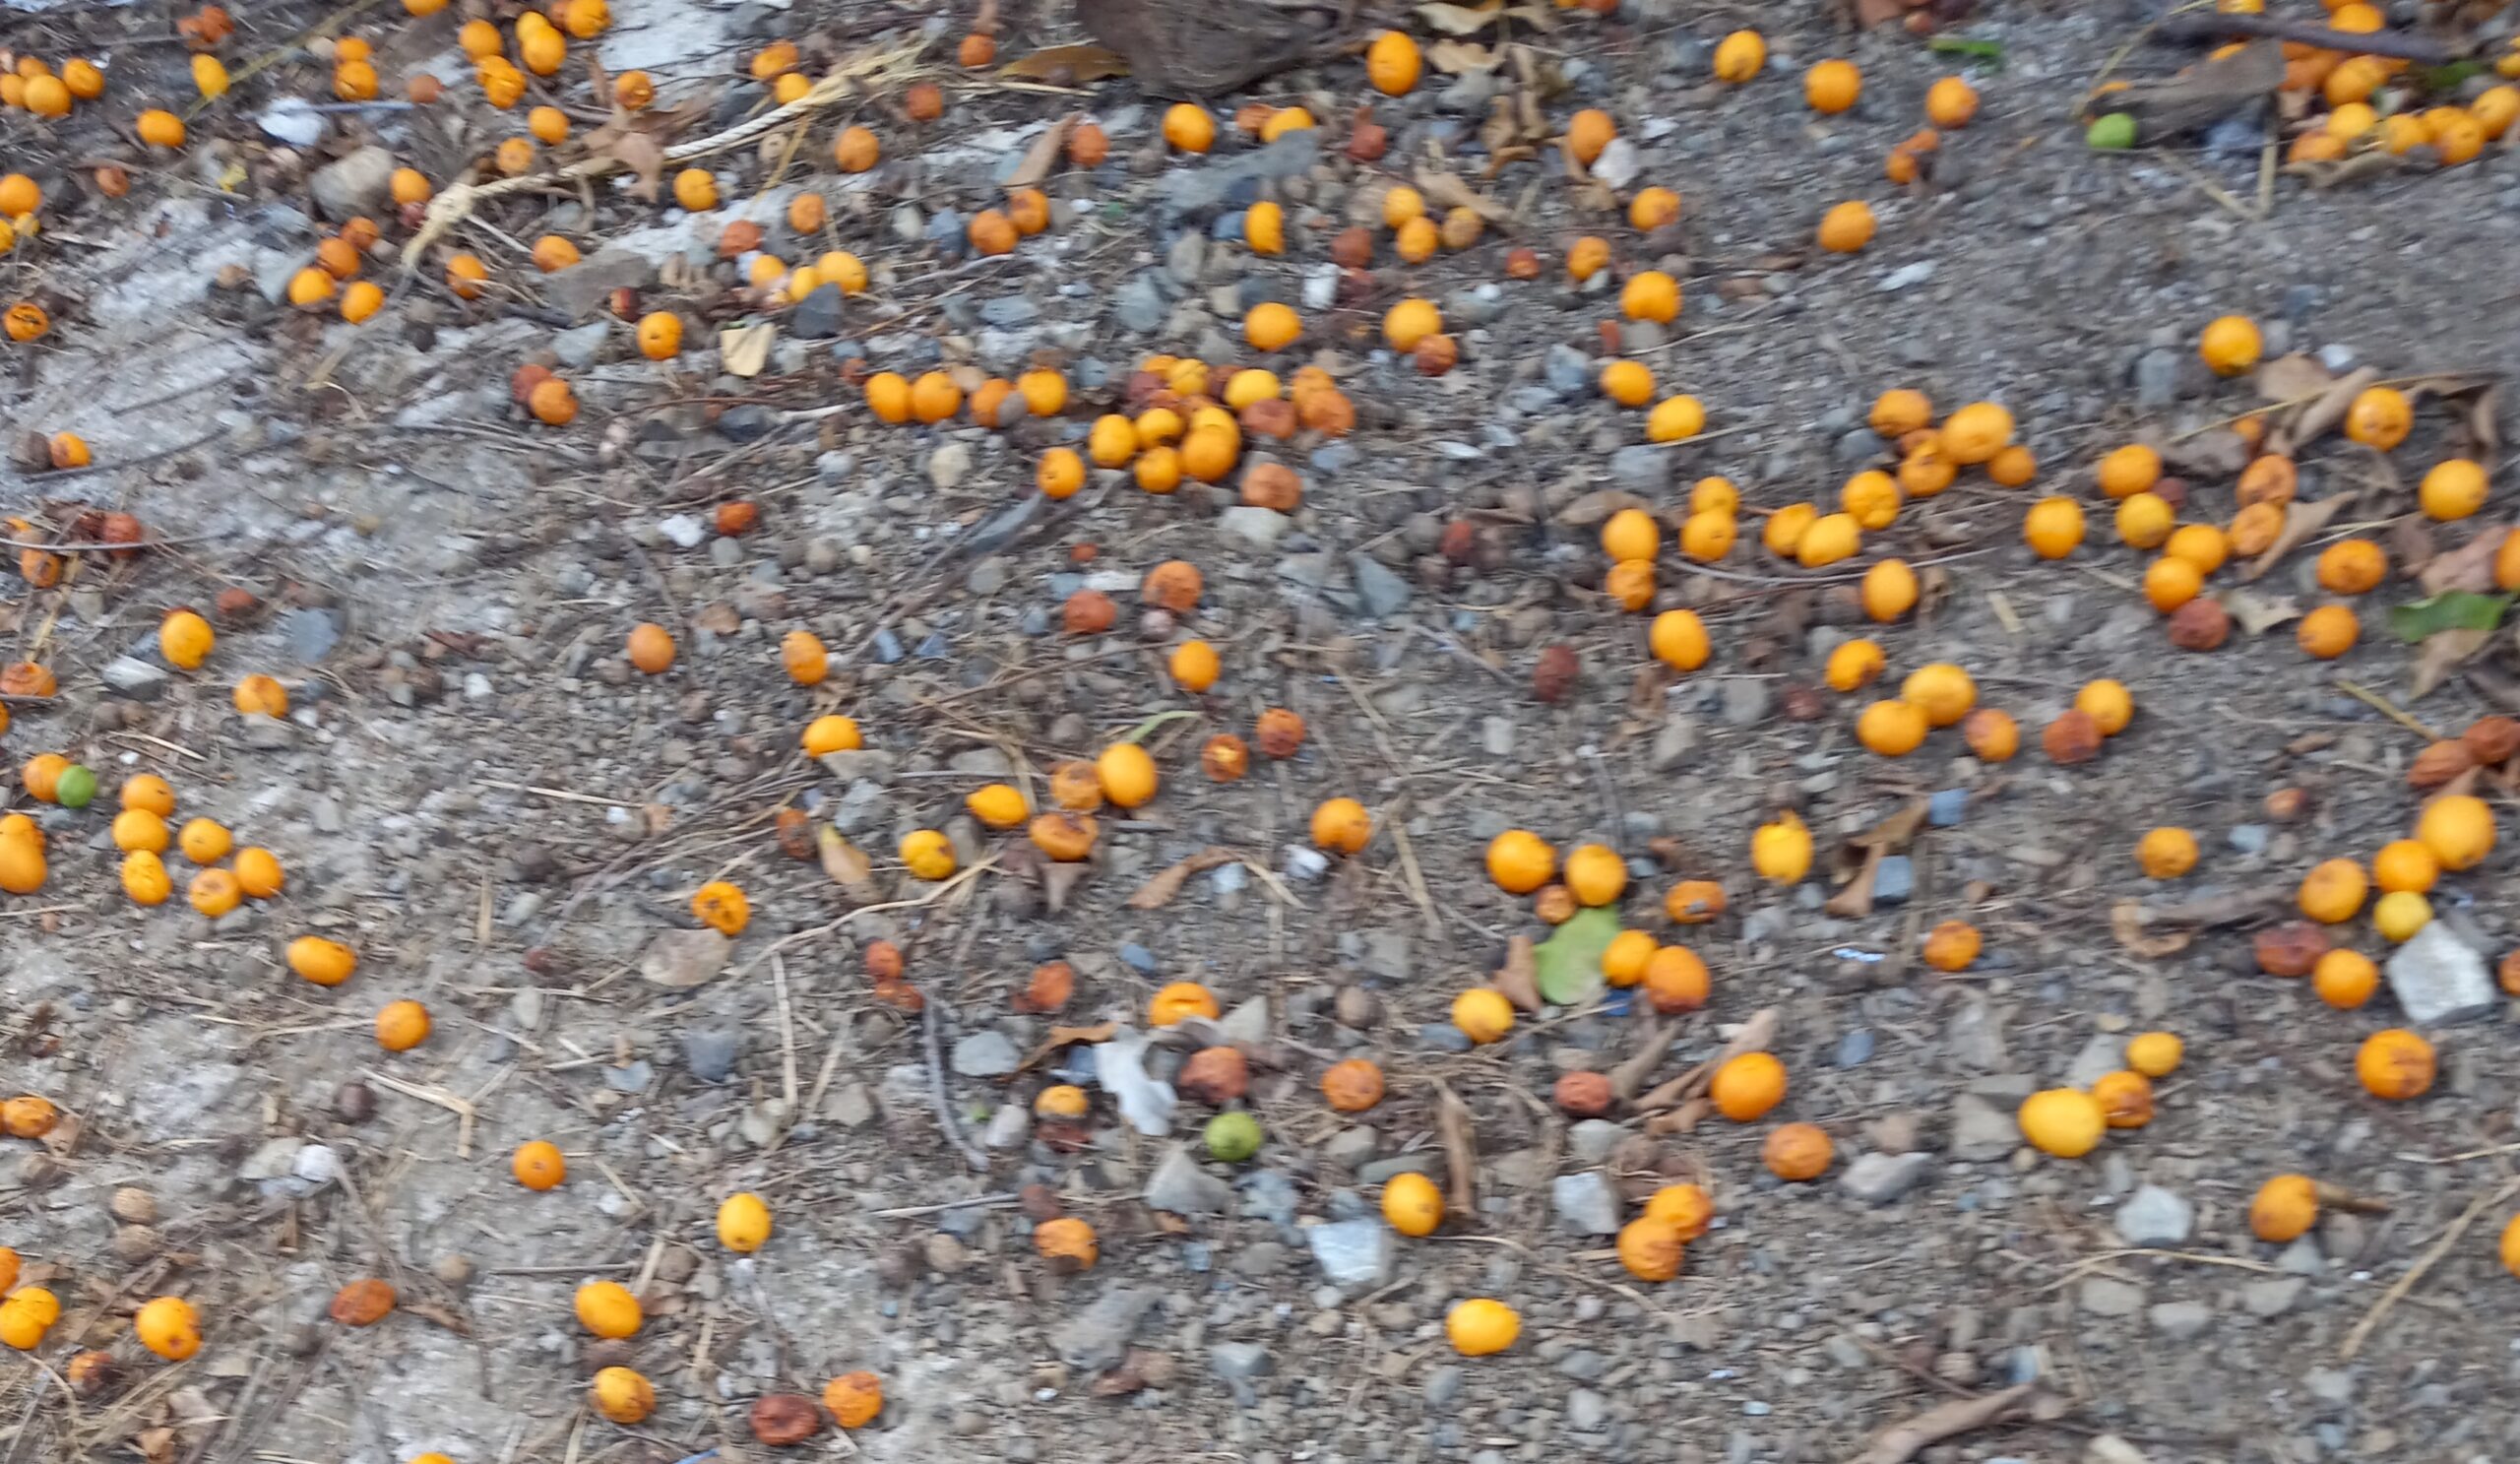 There are literally thousands of hog plum fruits on the ground wasting. In the old days gone by in the Virgin Islands history , this was an uncommon sight to see because children and adult ate the fruits. (Photo by Olasee Davis)